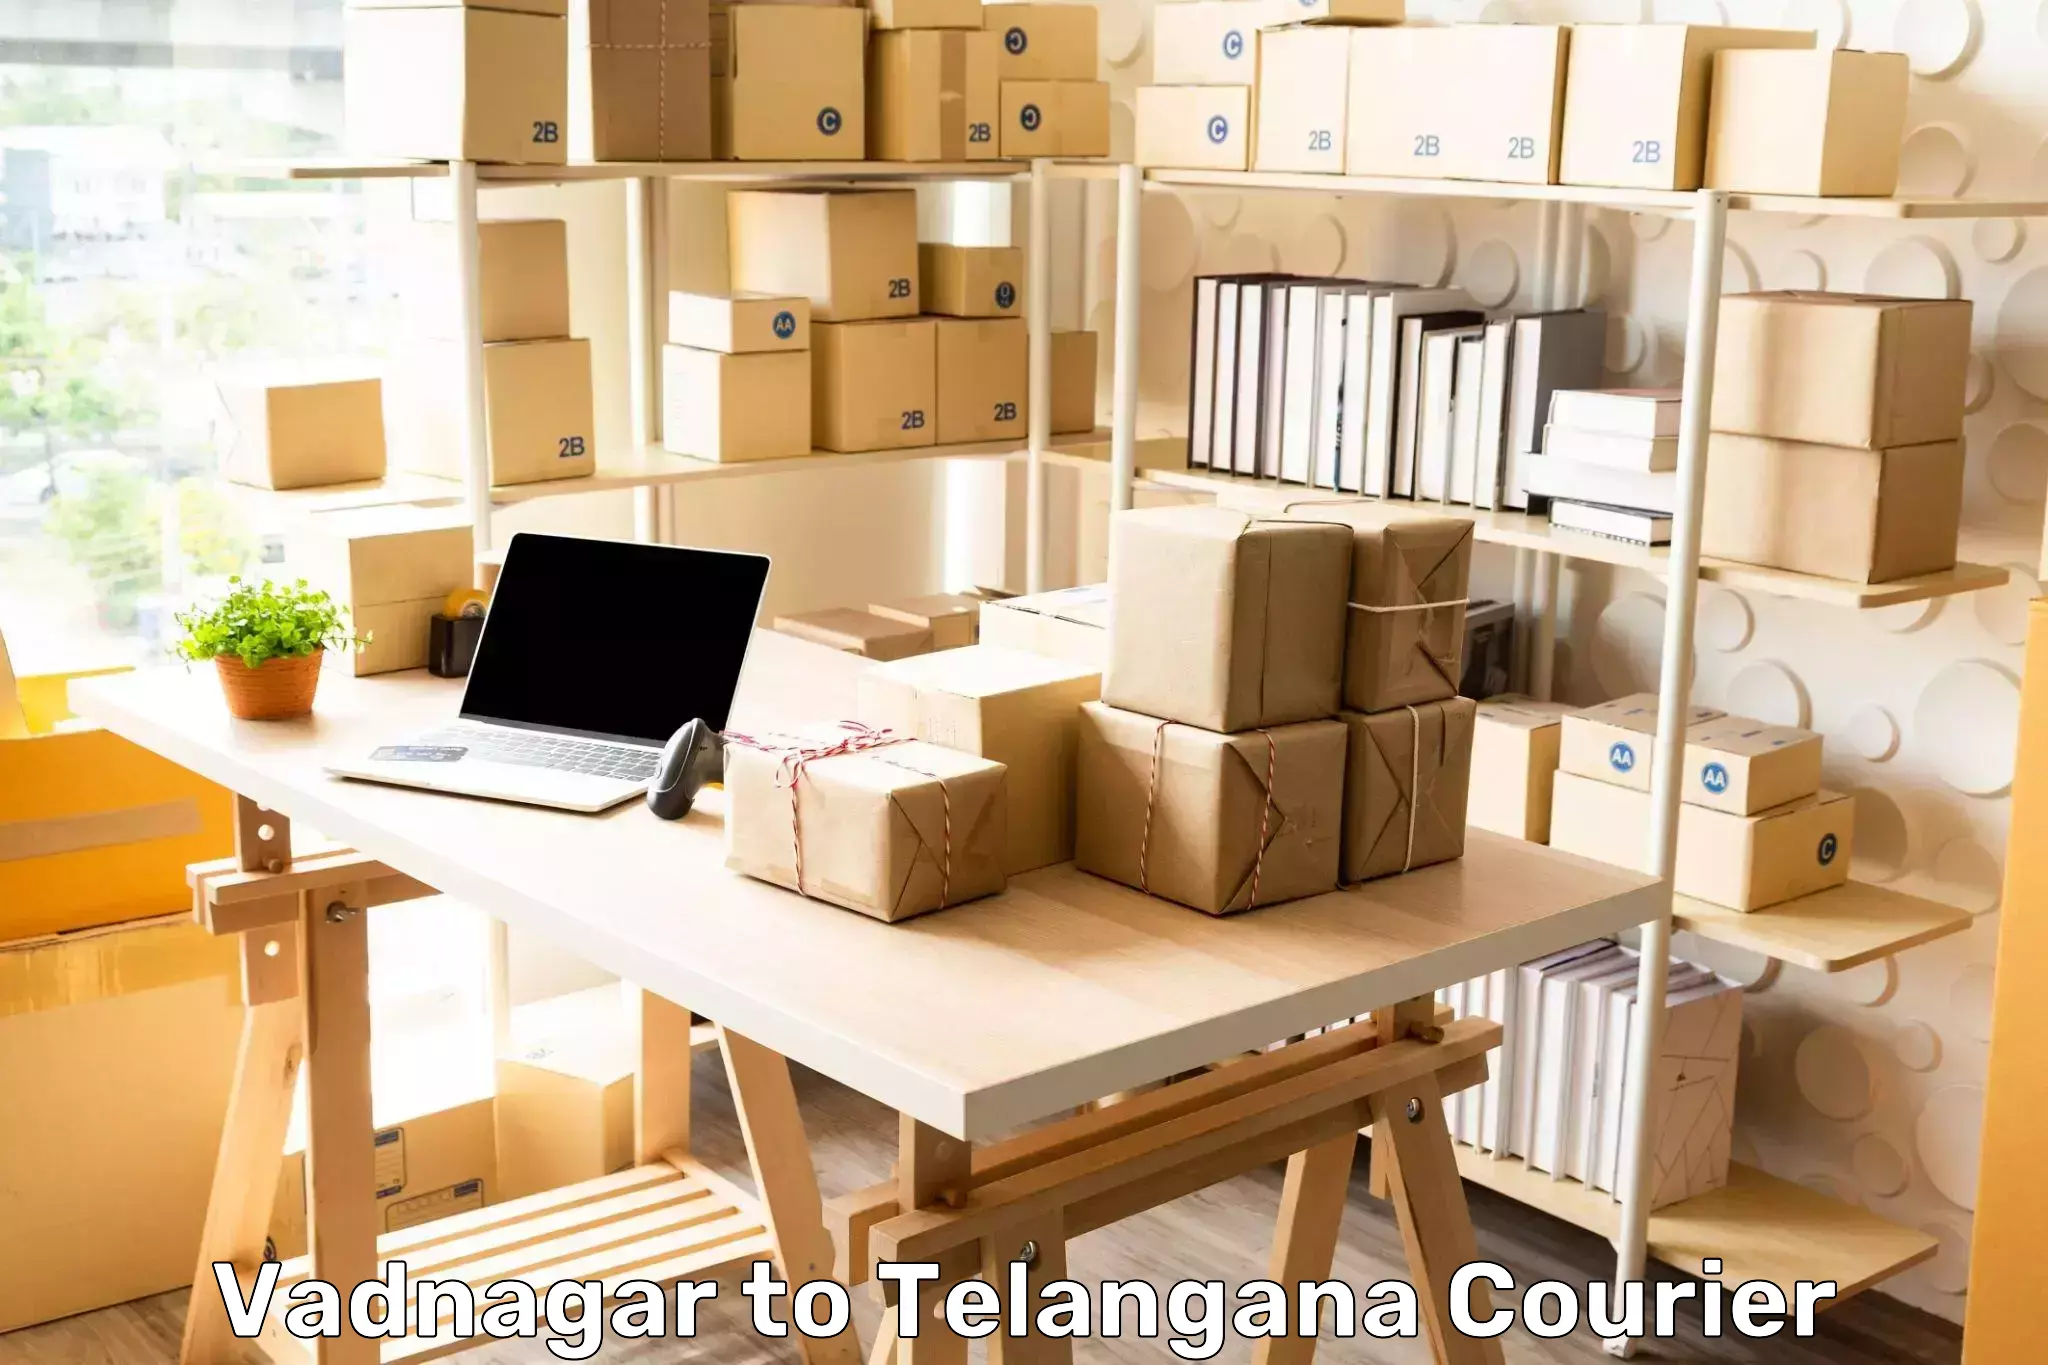 Cost-effective courier options Vadnagar to Telangana